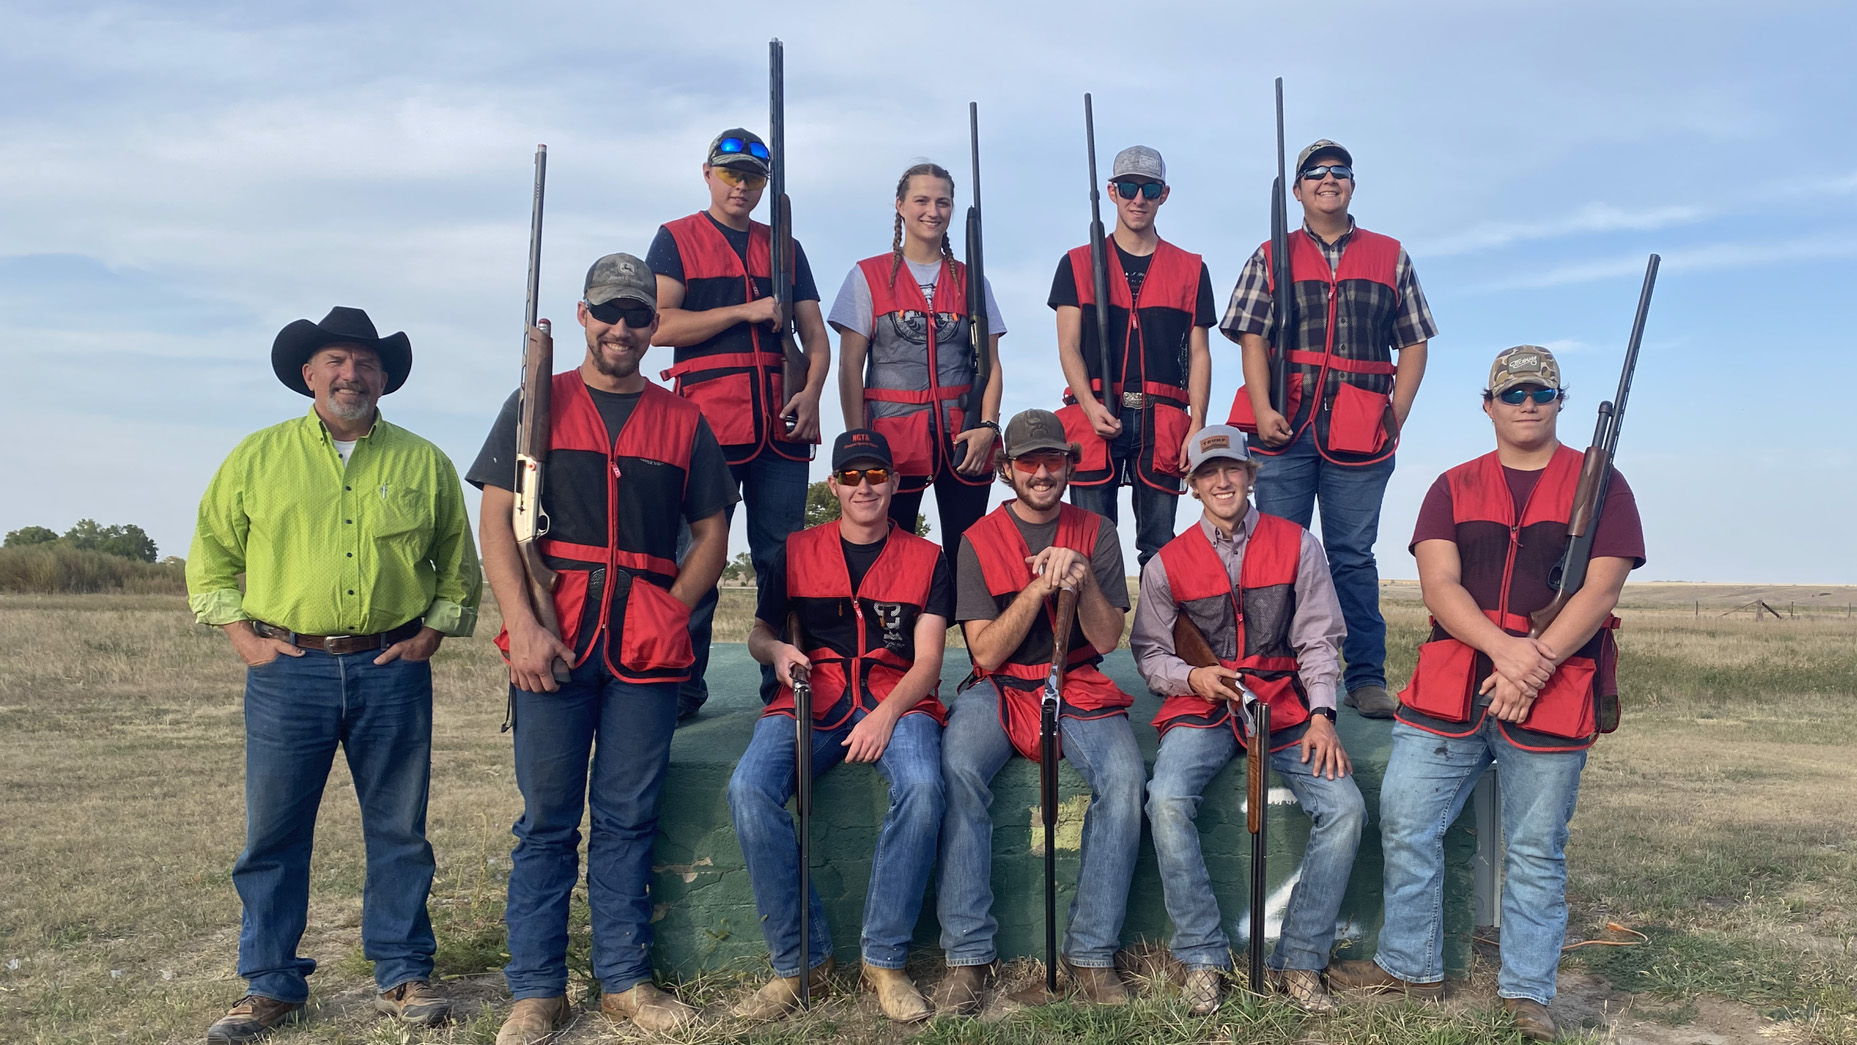 The NCTA Shotgun Sports Team is this week’s feature in the Aggie Club Highlight. The club's Sporting Clays event for the public is Saturday. (Bassett / NCTA News photo)